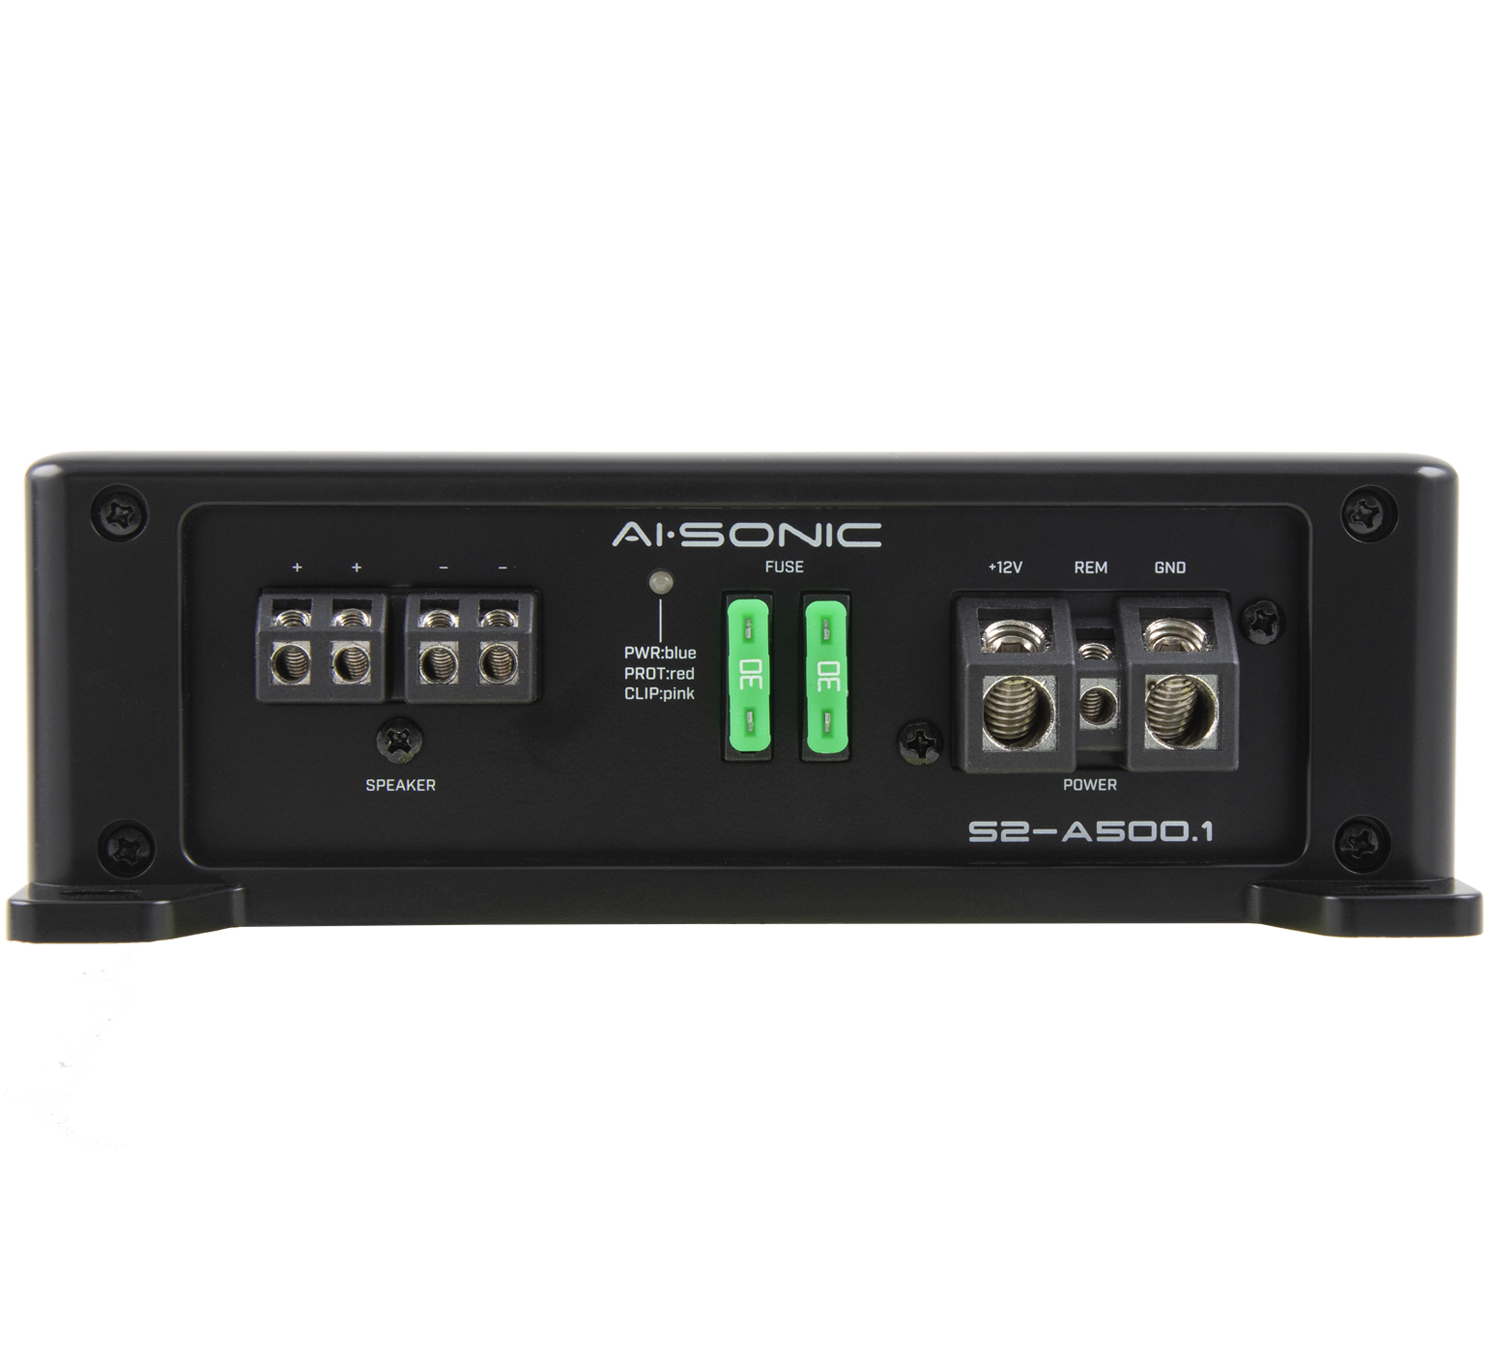 AI-SONIC S2-A500.1 with S2-BASS KNOB